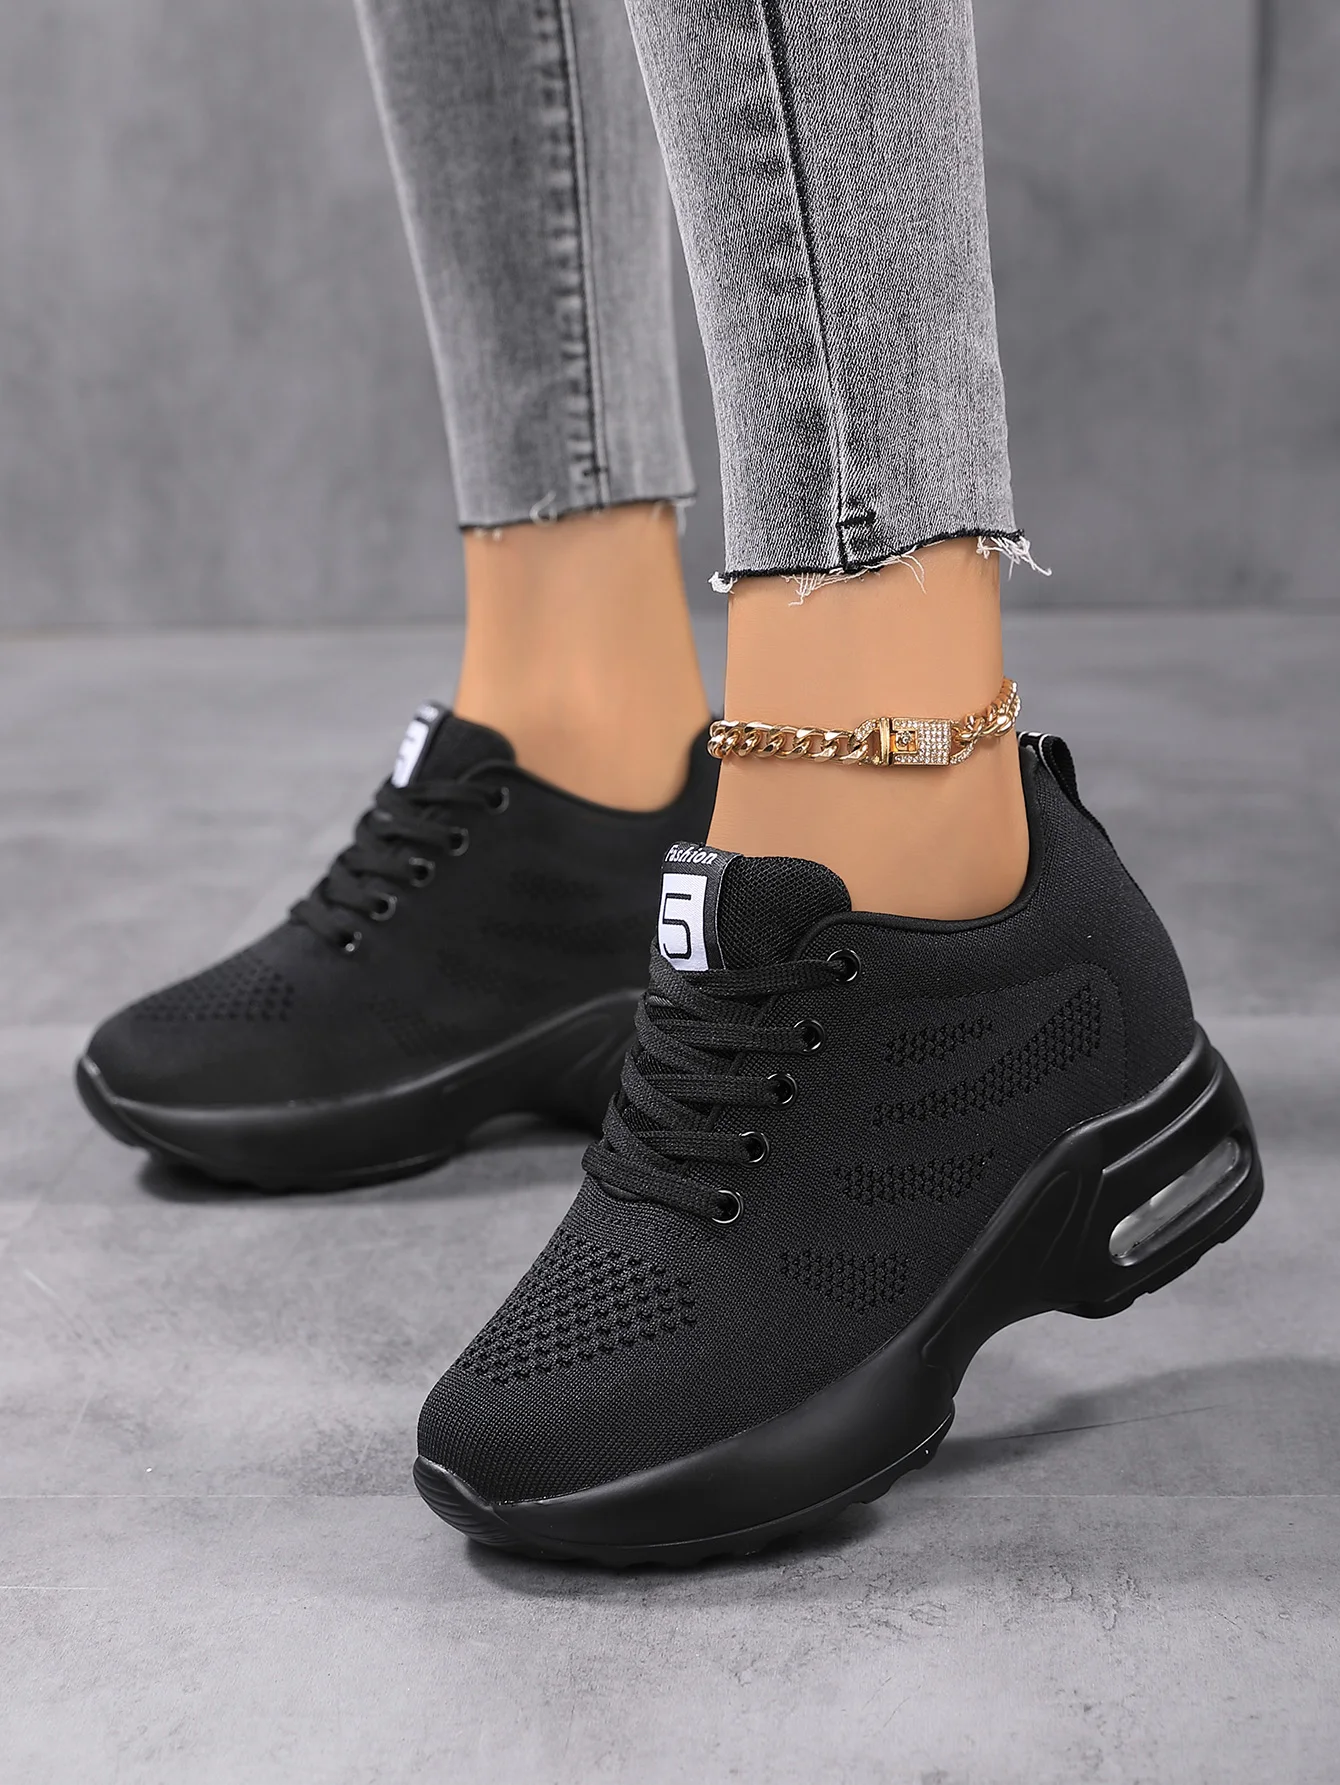 Fashion Women Sneakers 2023 Platform Casual Shoes For Women Tennis Shoes Pluis Size Sport Shoes Running Shoes Mesh Breathable